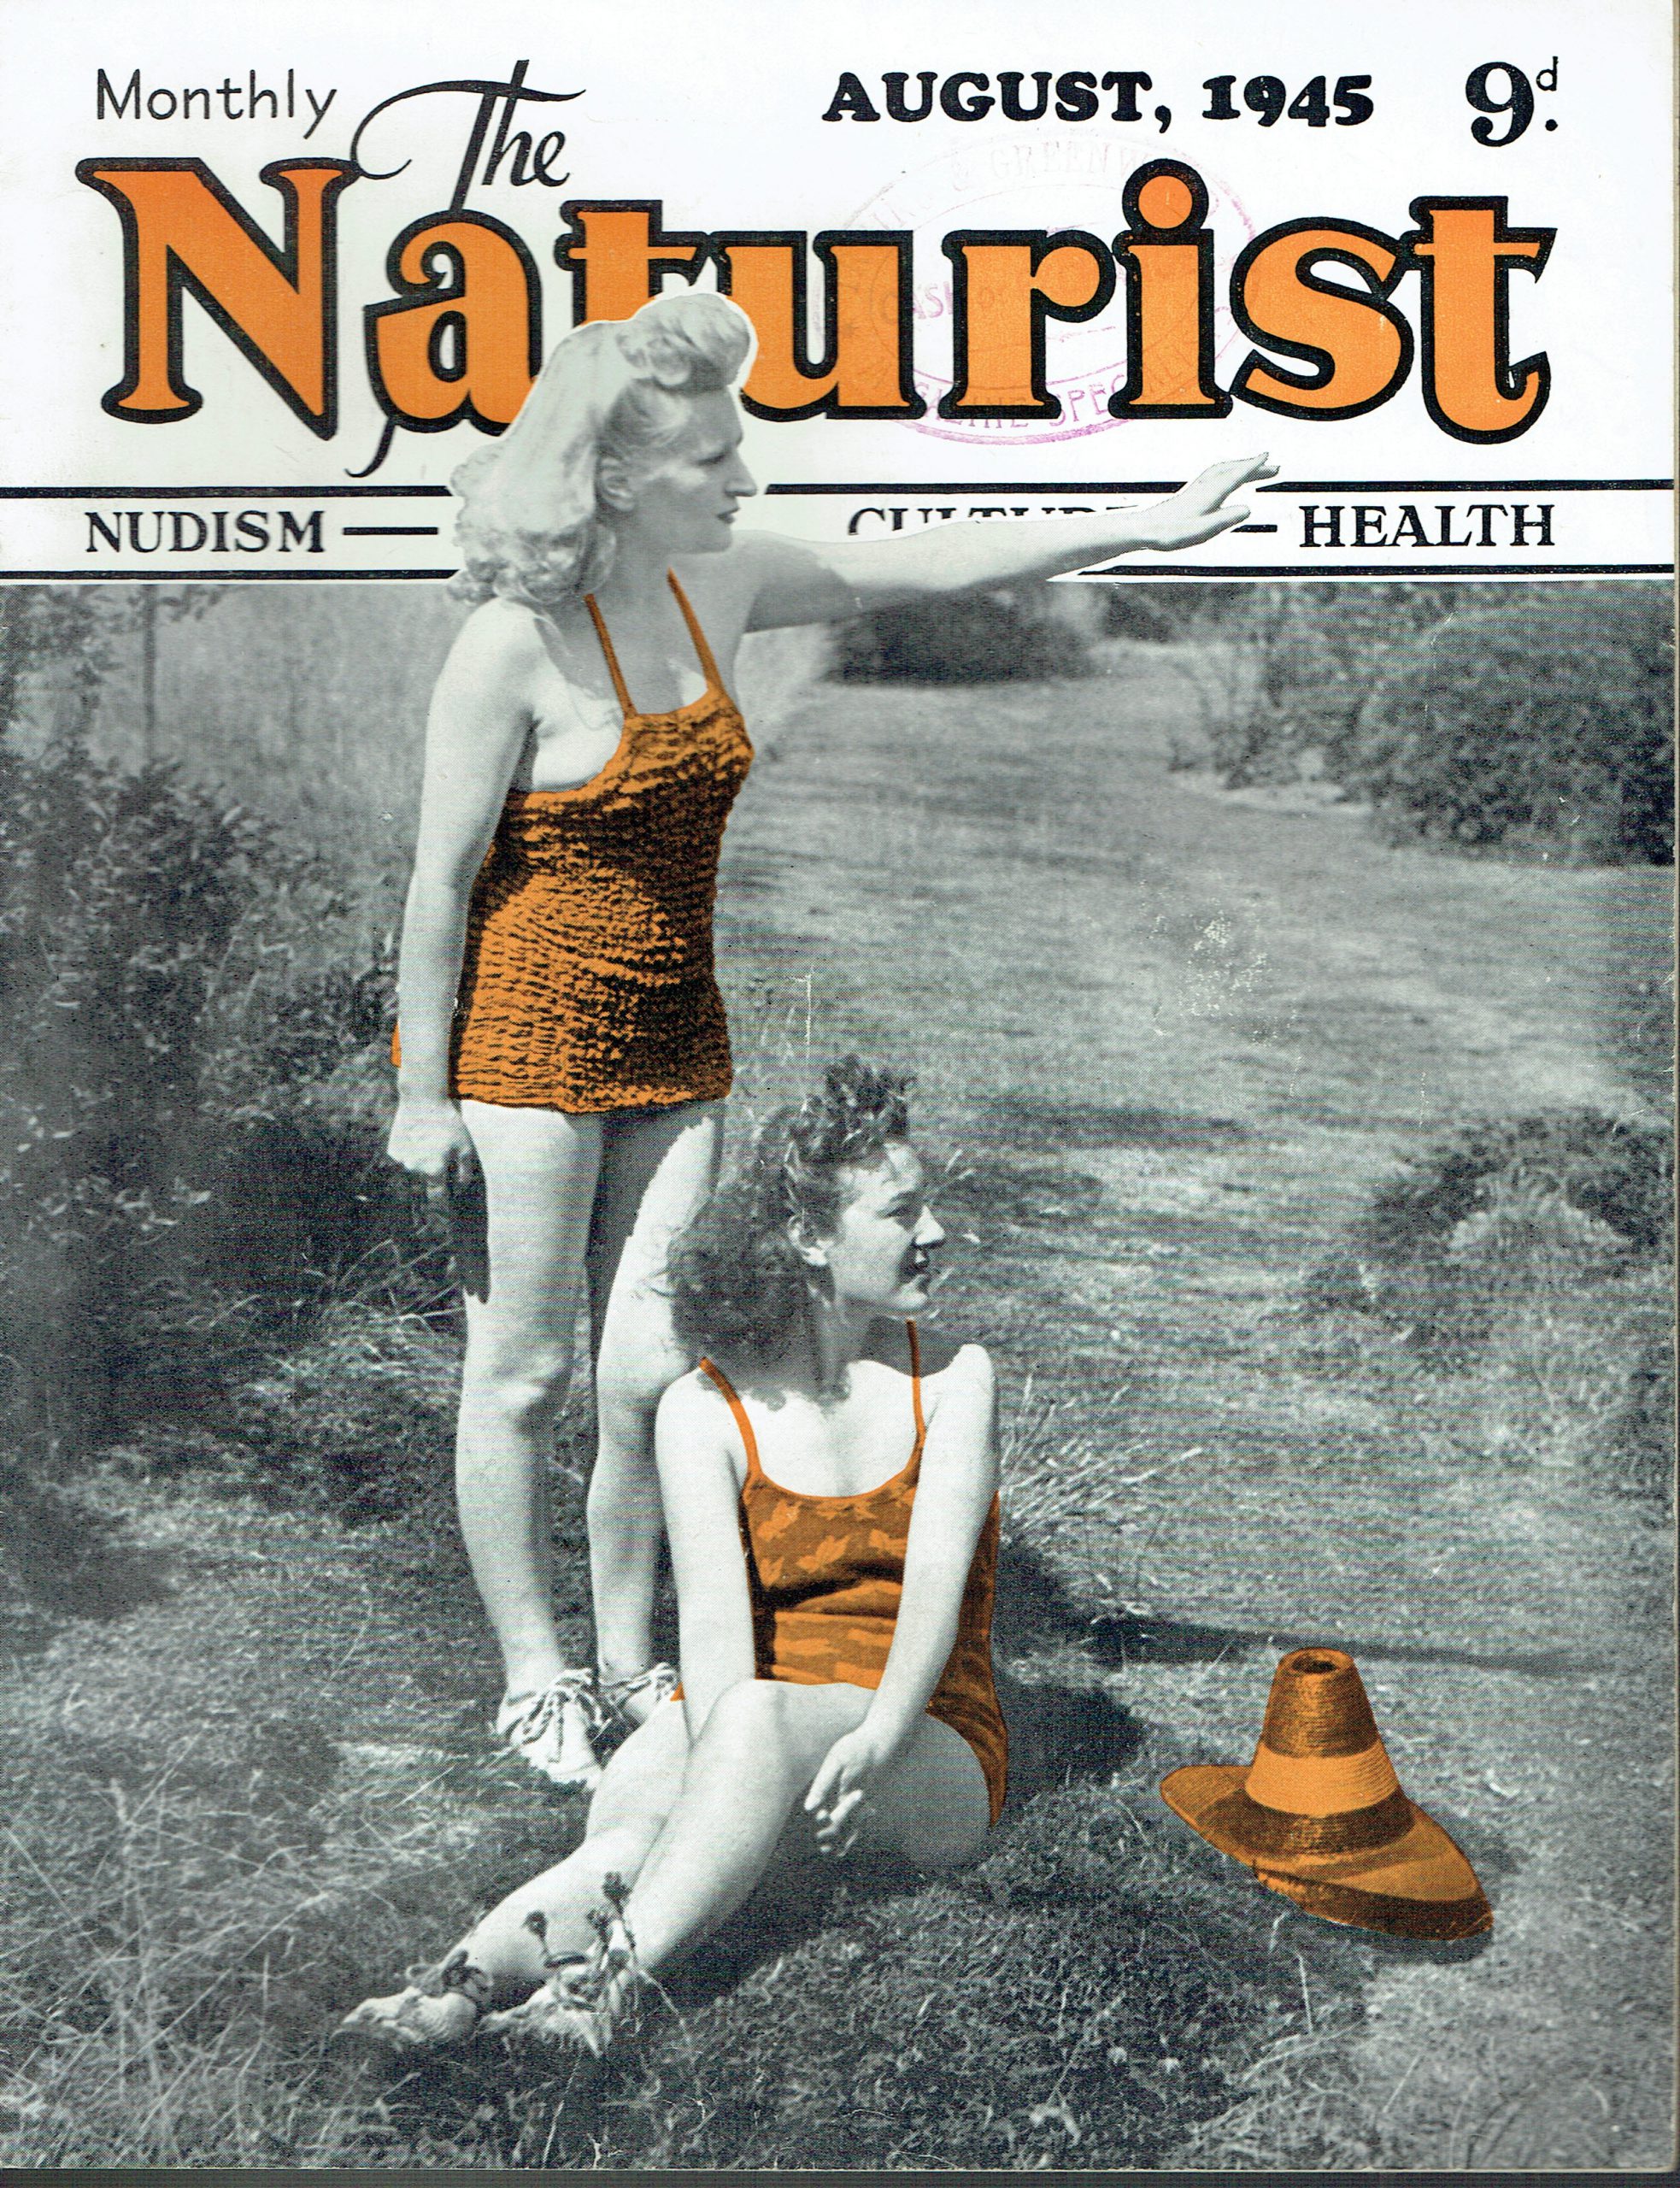 THE NATURIST MONTHLY AUGUST 1945 NUDISM HEALTH Vintage and Modern Magazines  - Vintage Magazines